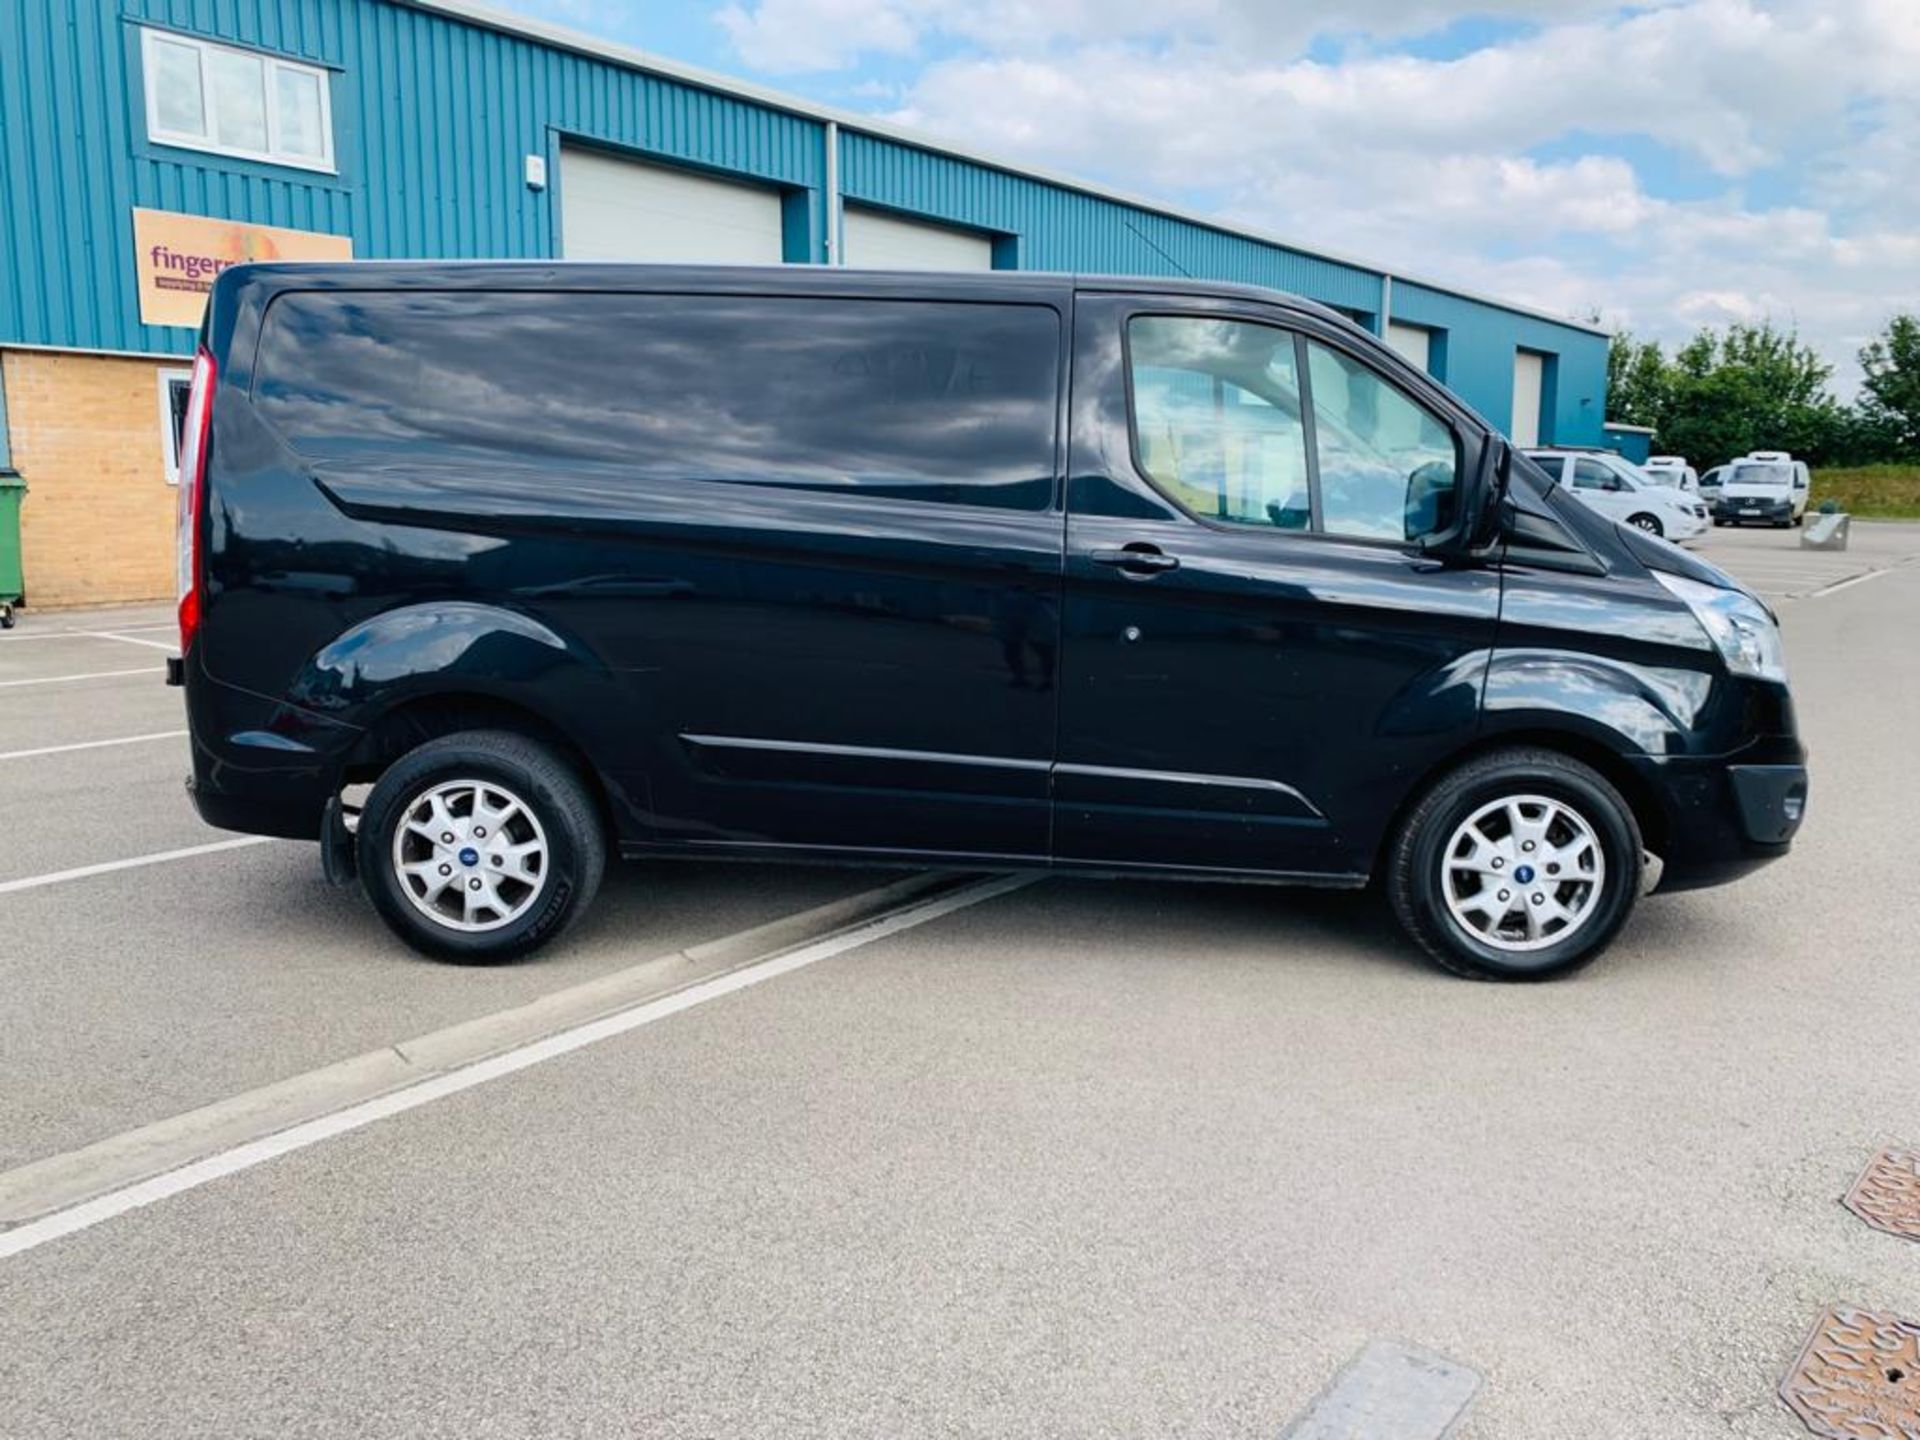 Ford Transit 2.2 TDCI Custom 270 Limited 2015 Model 6 Speed - Air Con - Park Assist - Image 8 of 26